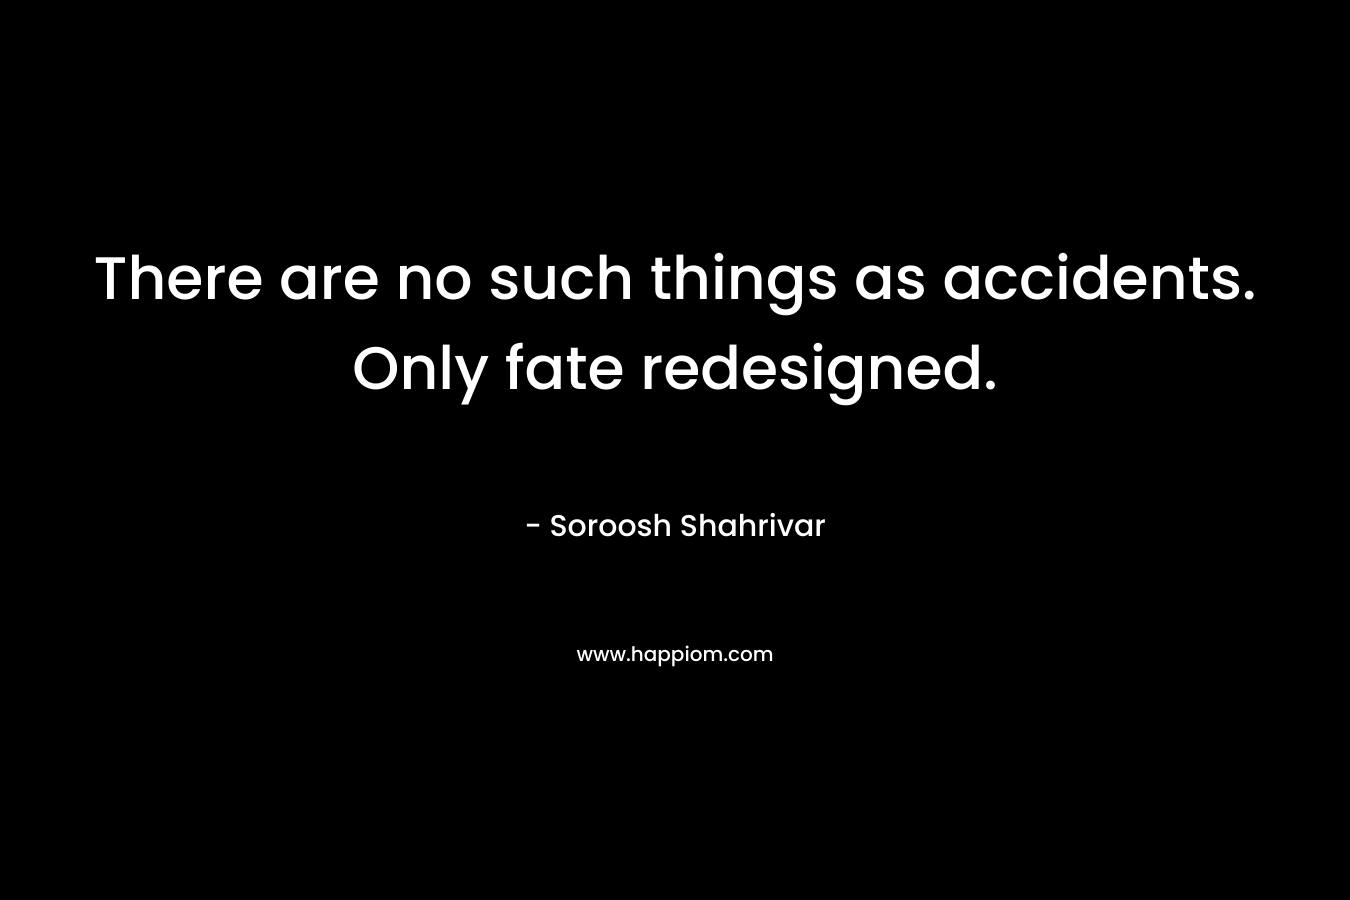 There are no such things as accidents. Only fate redesigned.